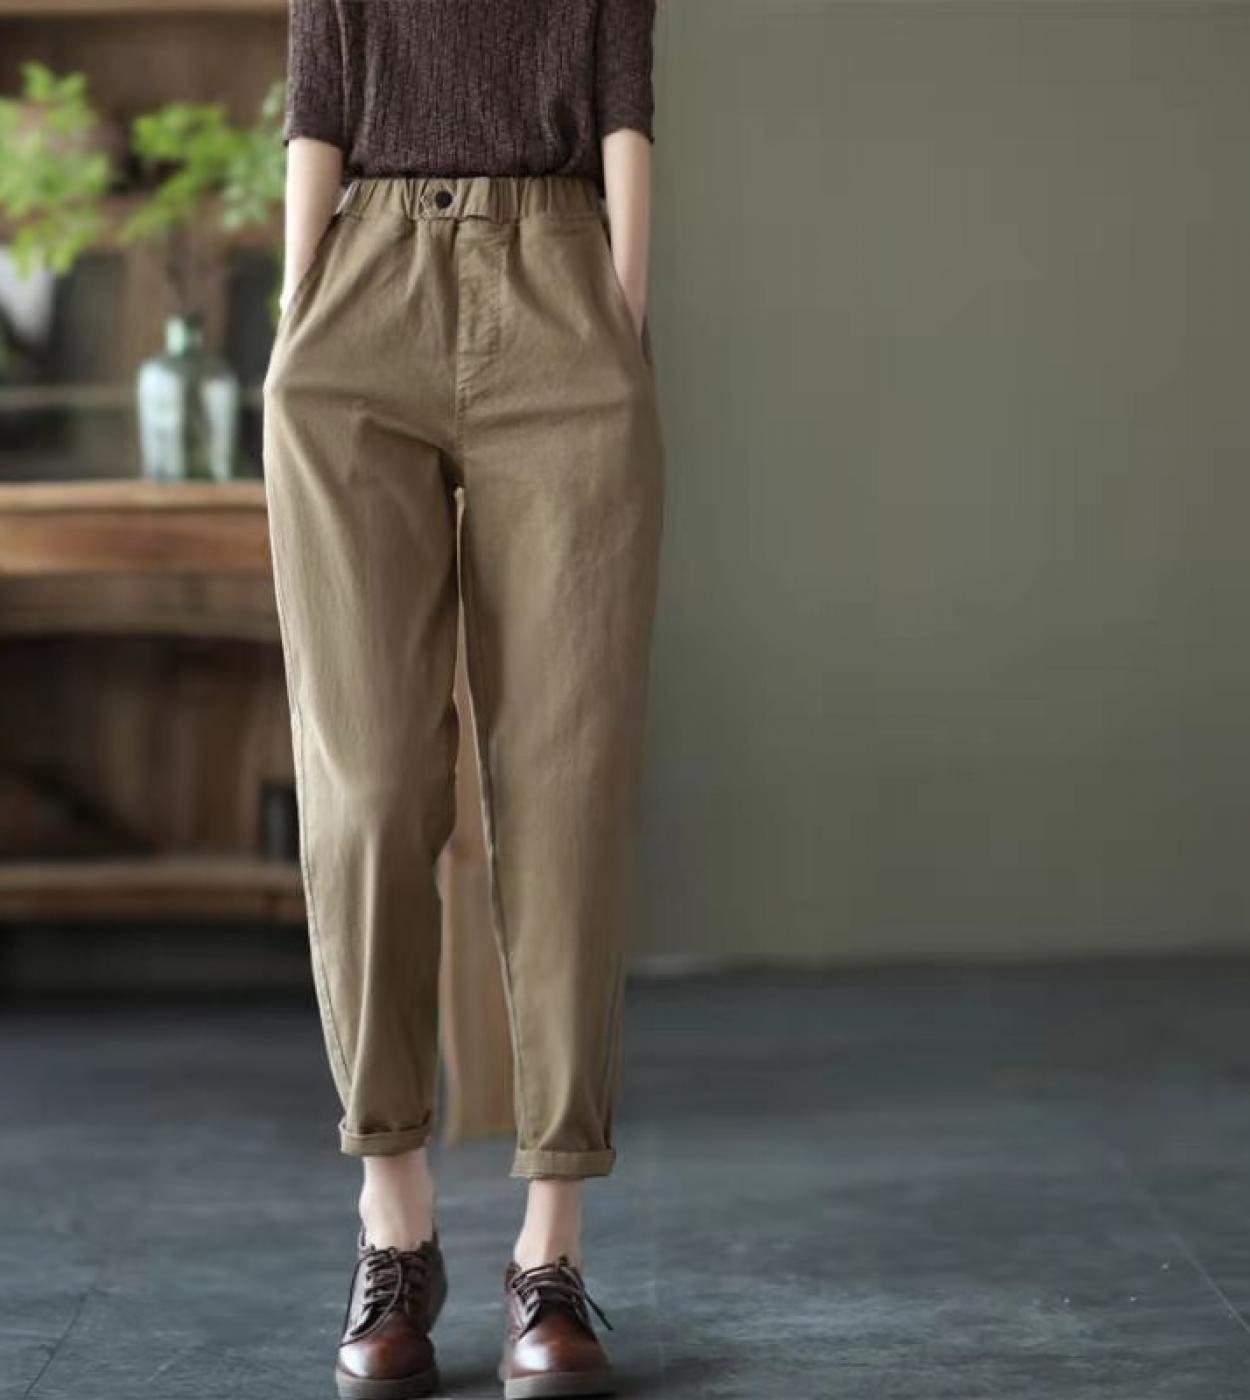 New Arrival Springautumn  Style Women Loose Casual Elastic Waist Ankle Length Pants All Matched Cotton Harem Pants W05p